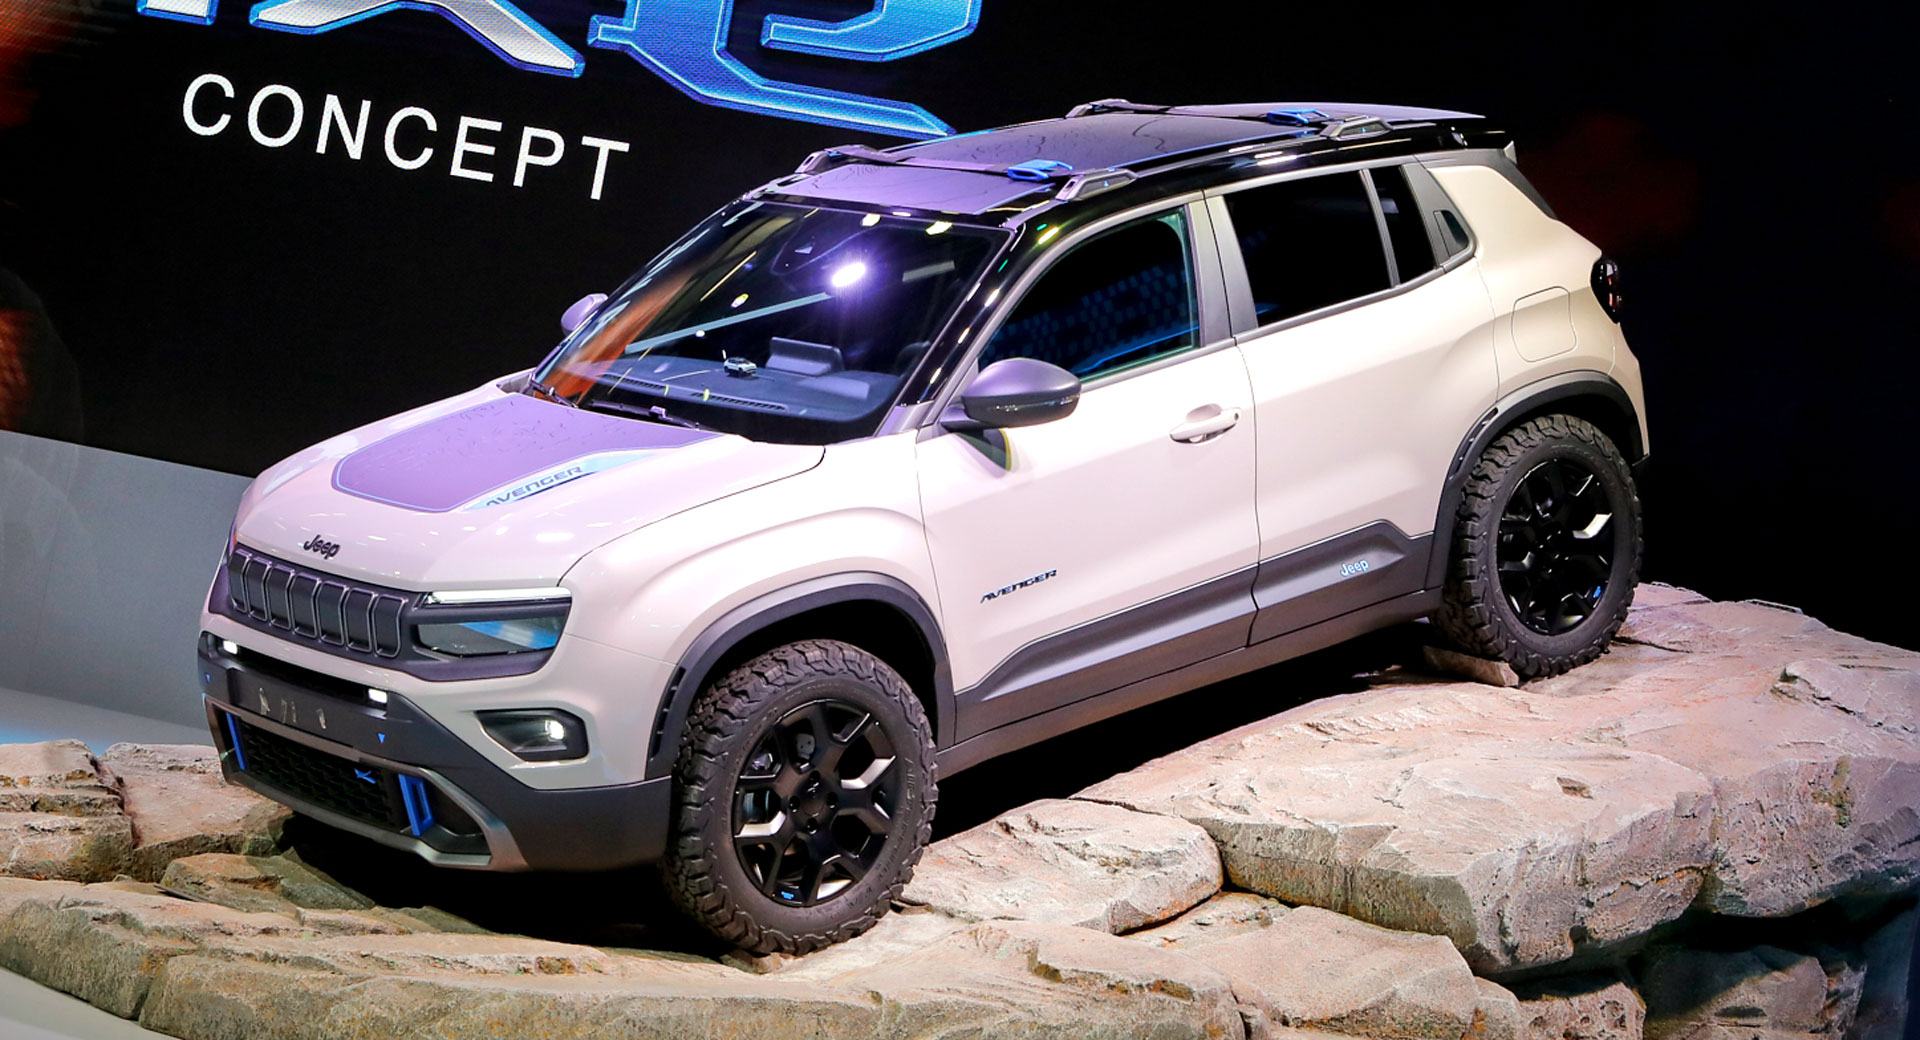 Jeep Avenger 4×4 Is A Chunkier Tough Concept Based On The New Baby EV